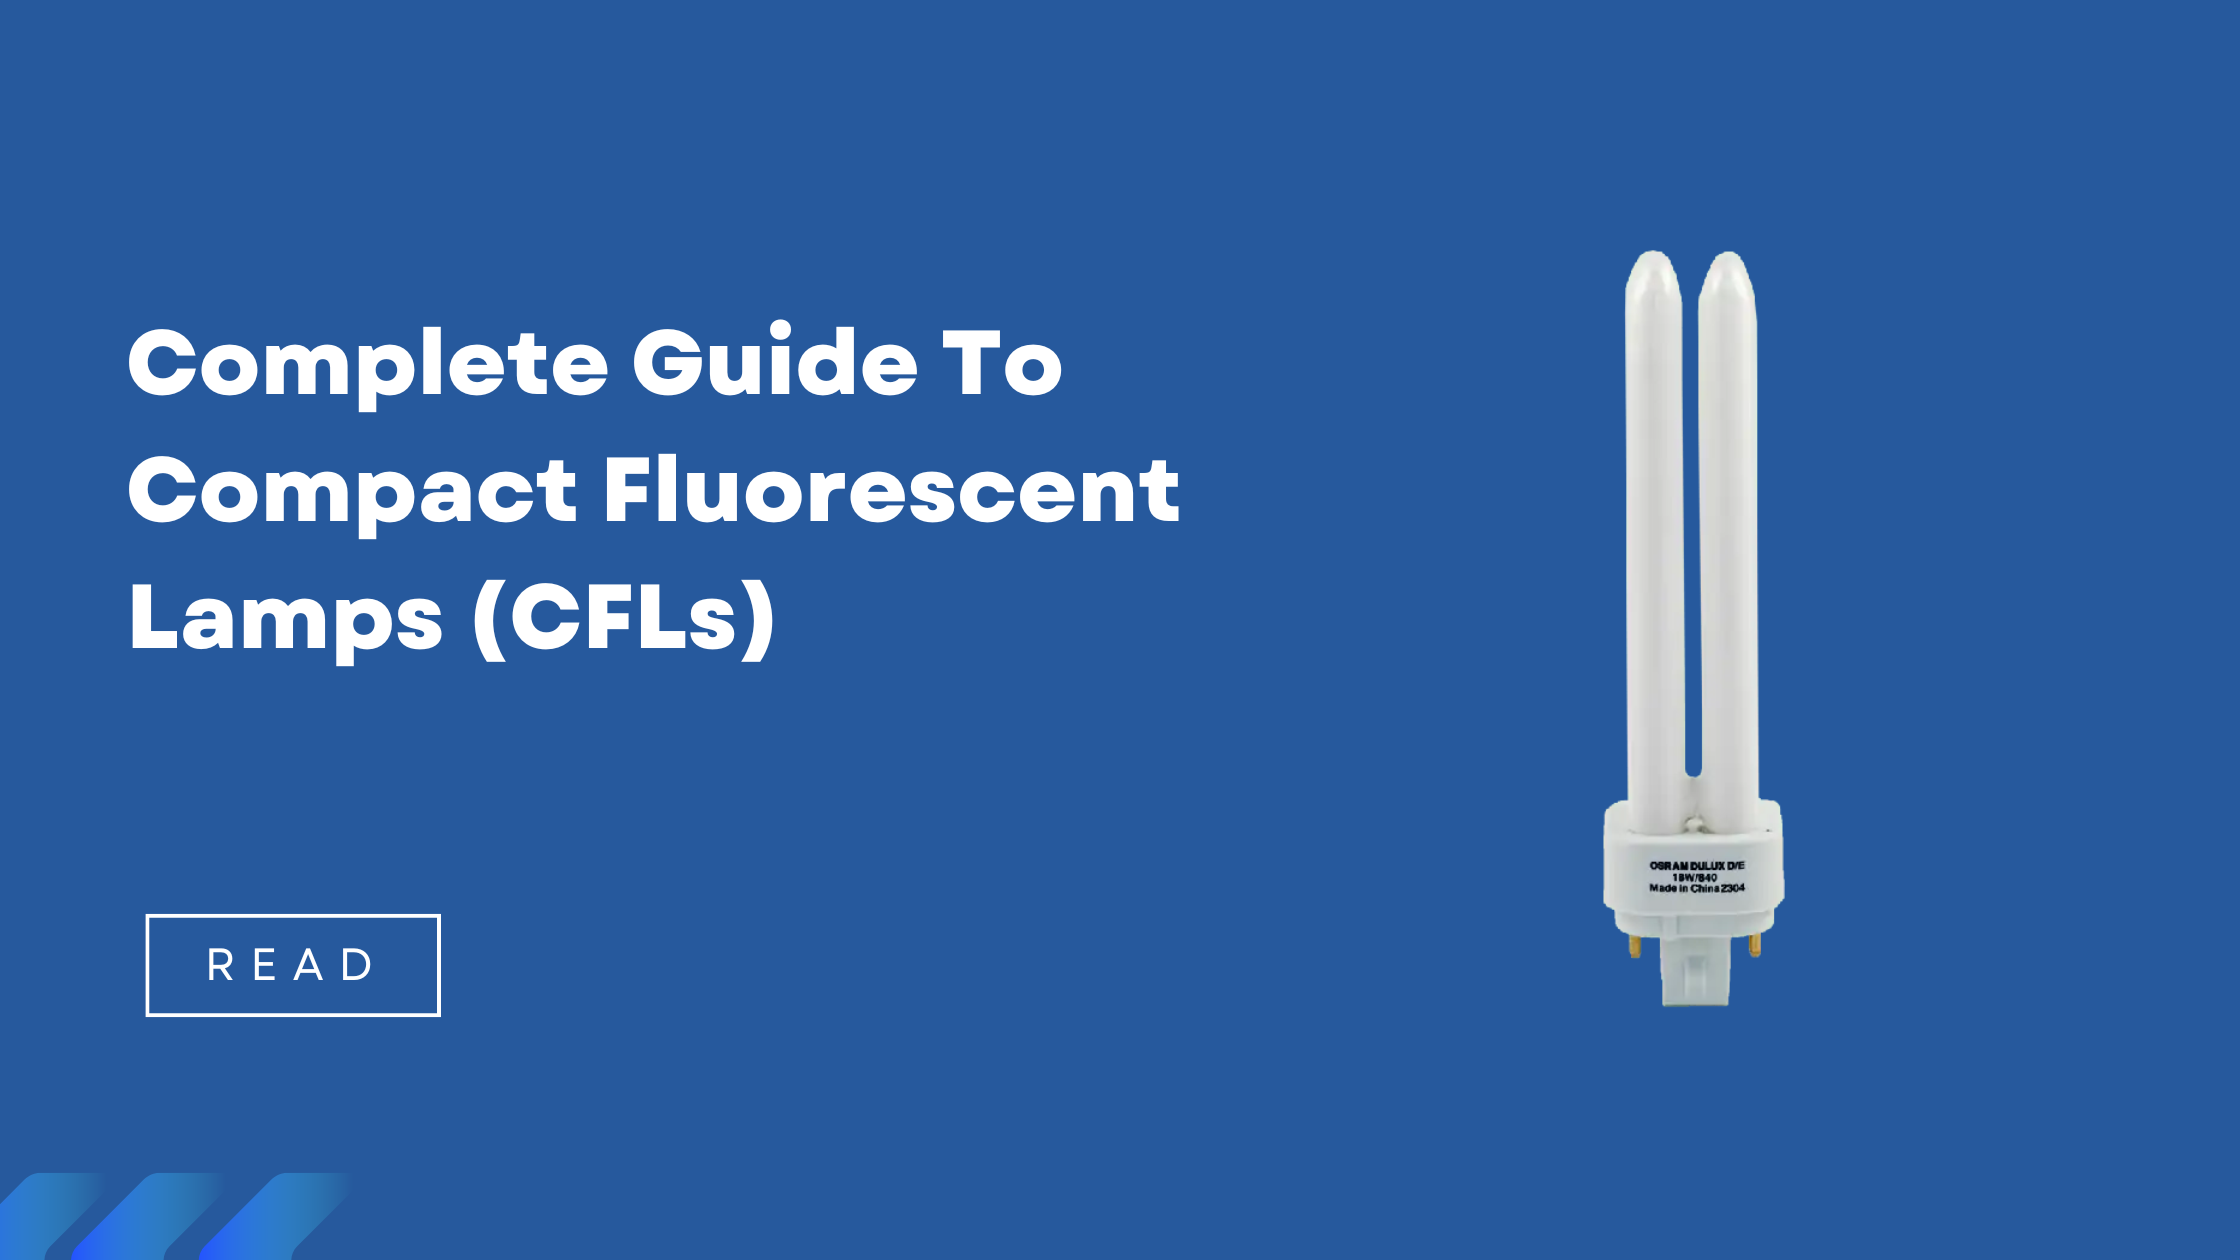 Complete Guide To Compact Fluorescent Lamps (CFLs) 